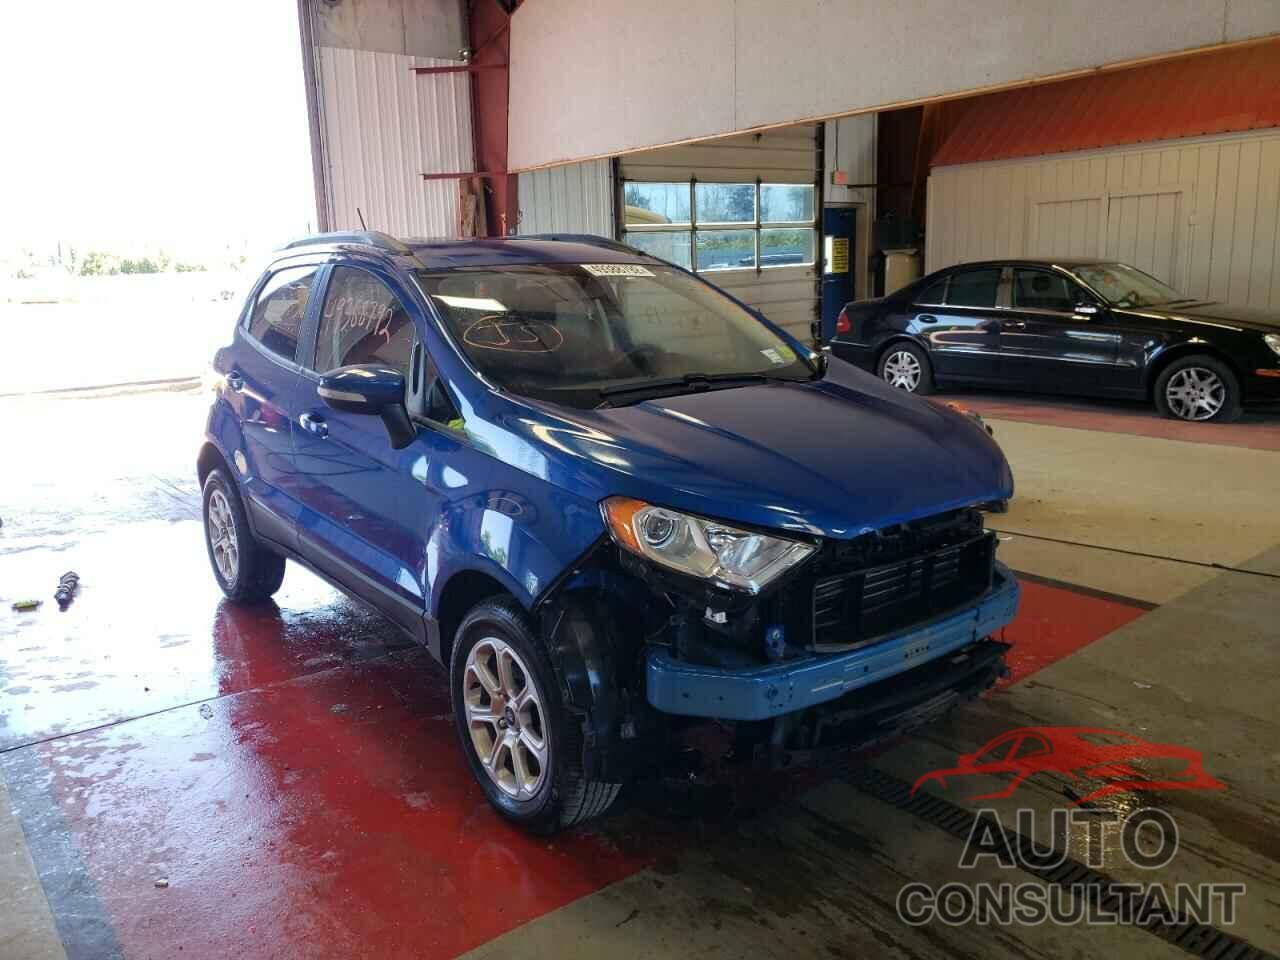 FORD ALL OTHER 2019 - MAJ6S3GLXKC253713